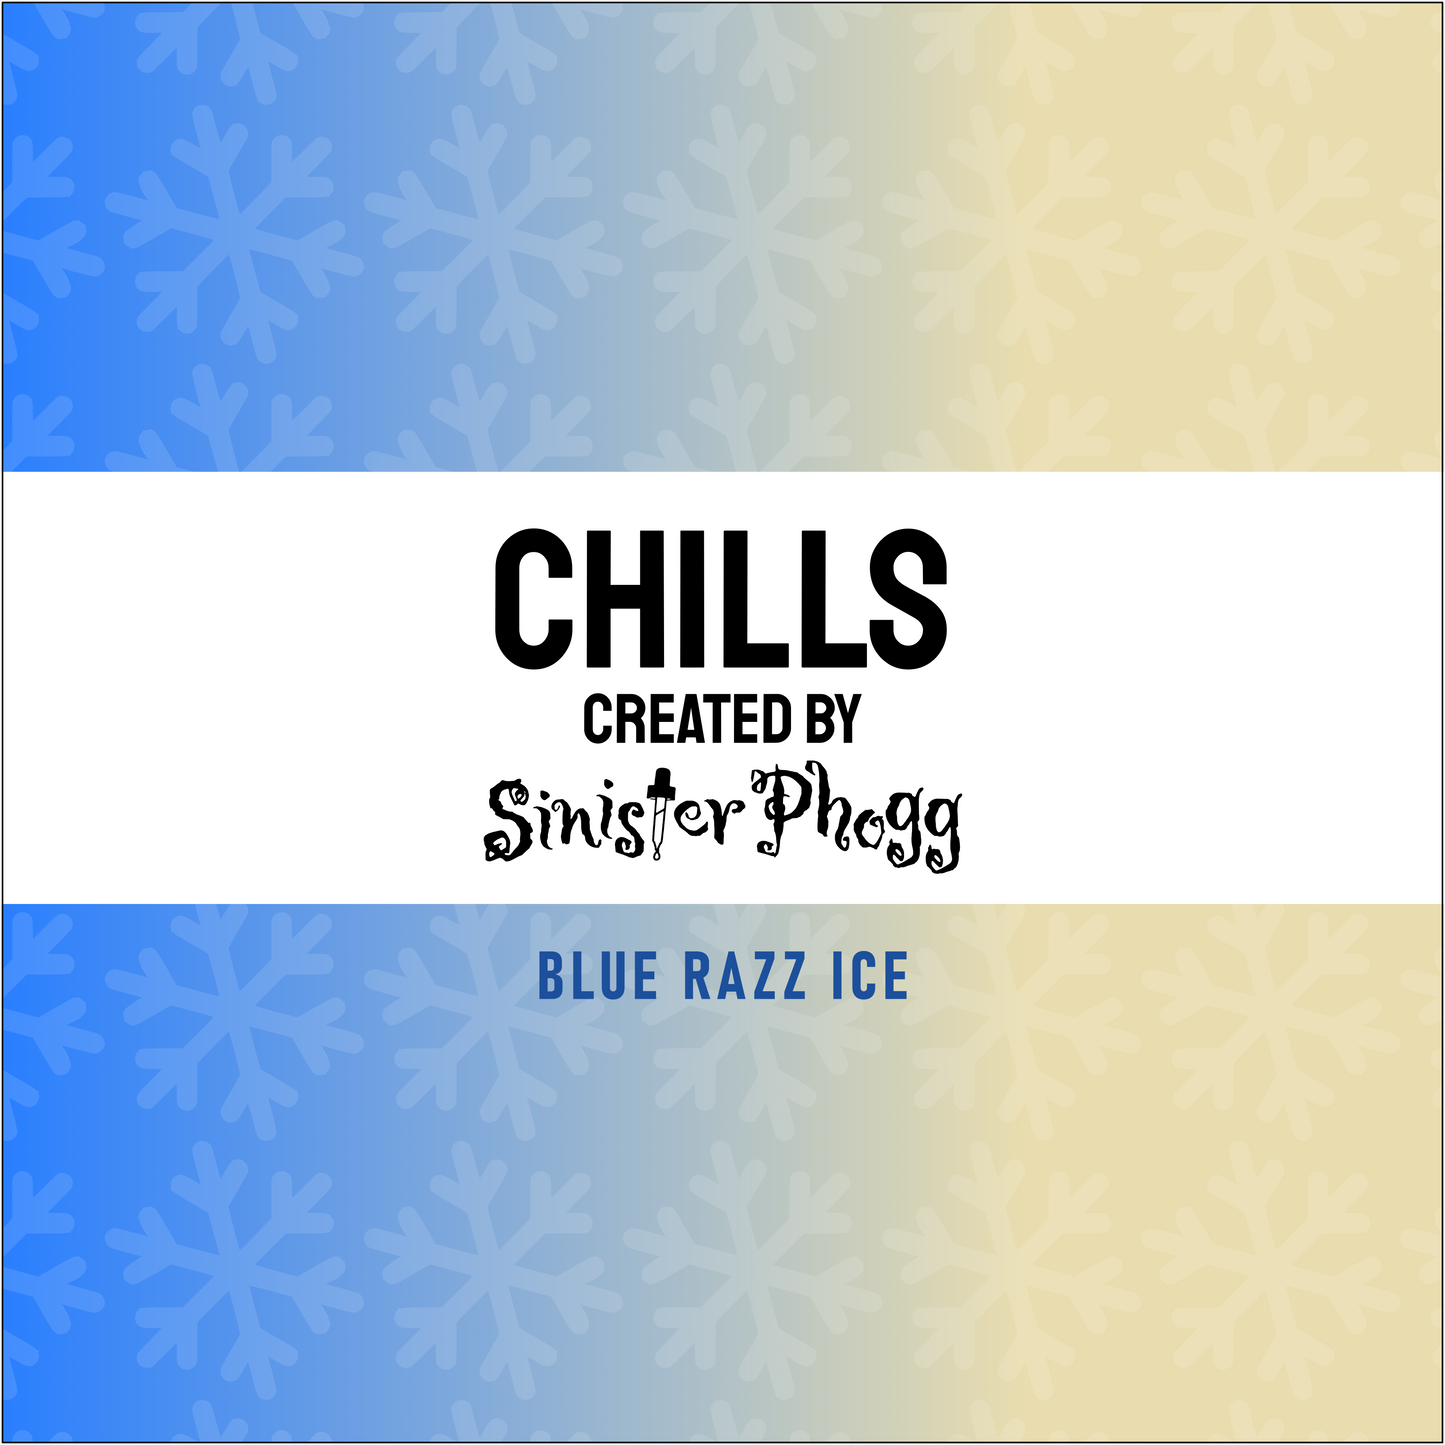 Blue Razz Ice - CHILLS by Sinister Phogg